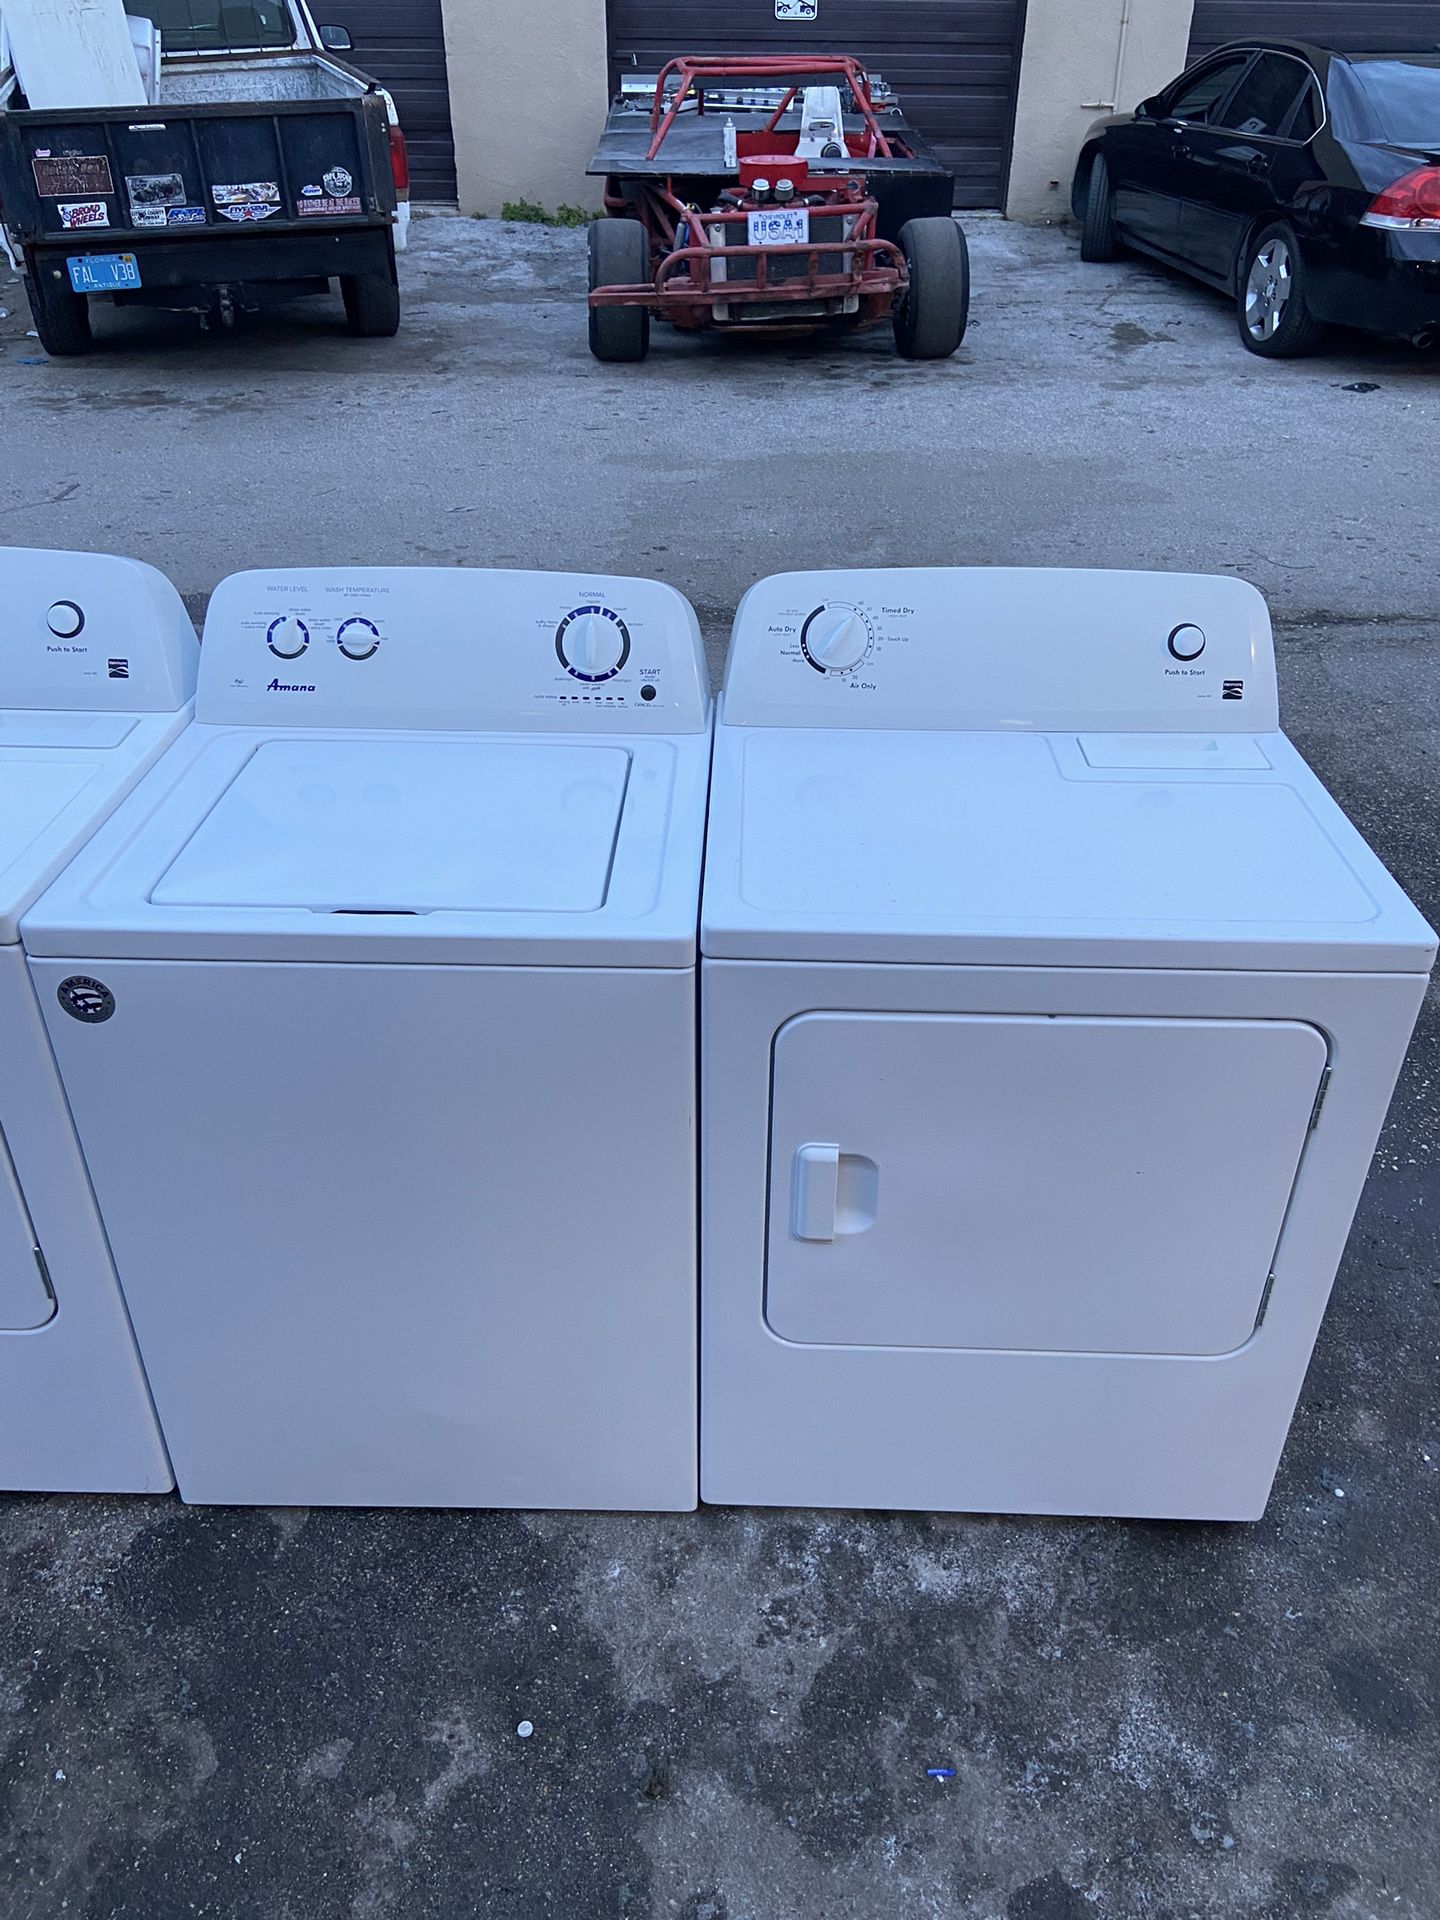 Amana Washer And Kenmore Dryer 